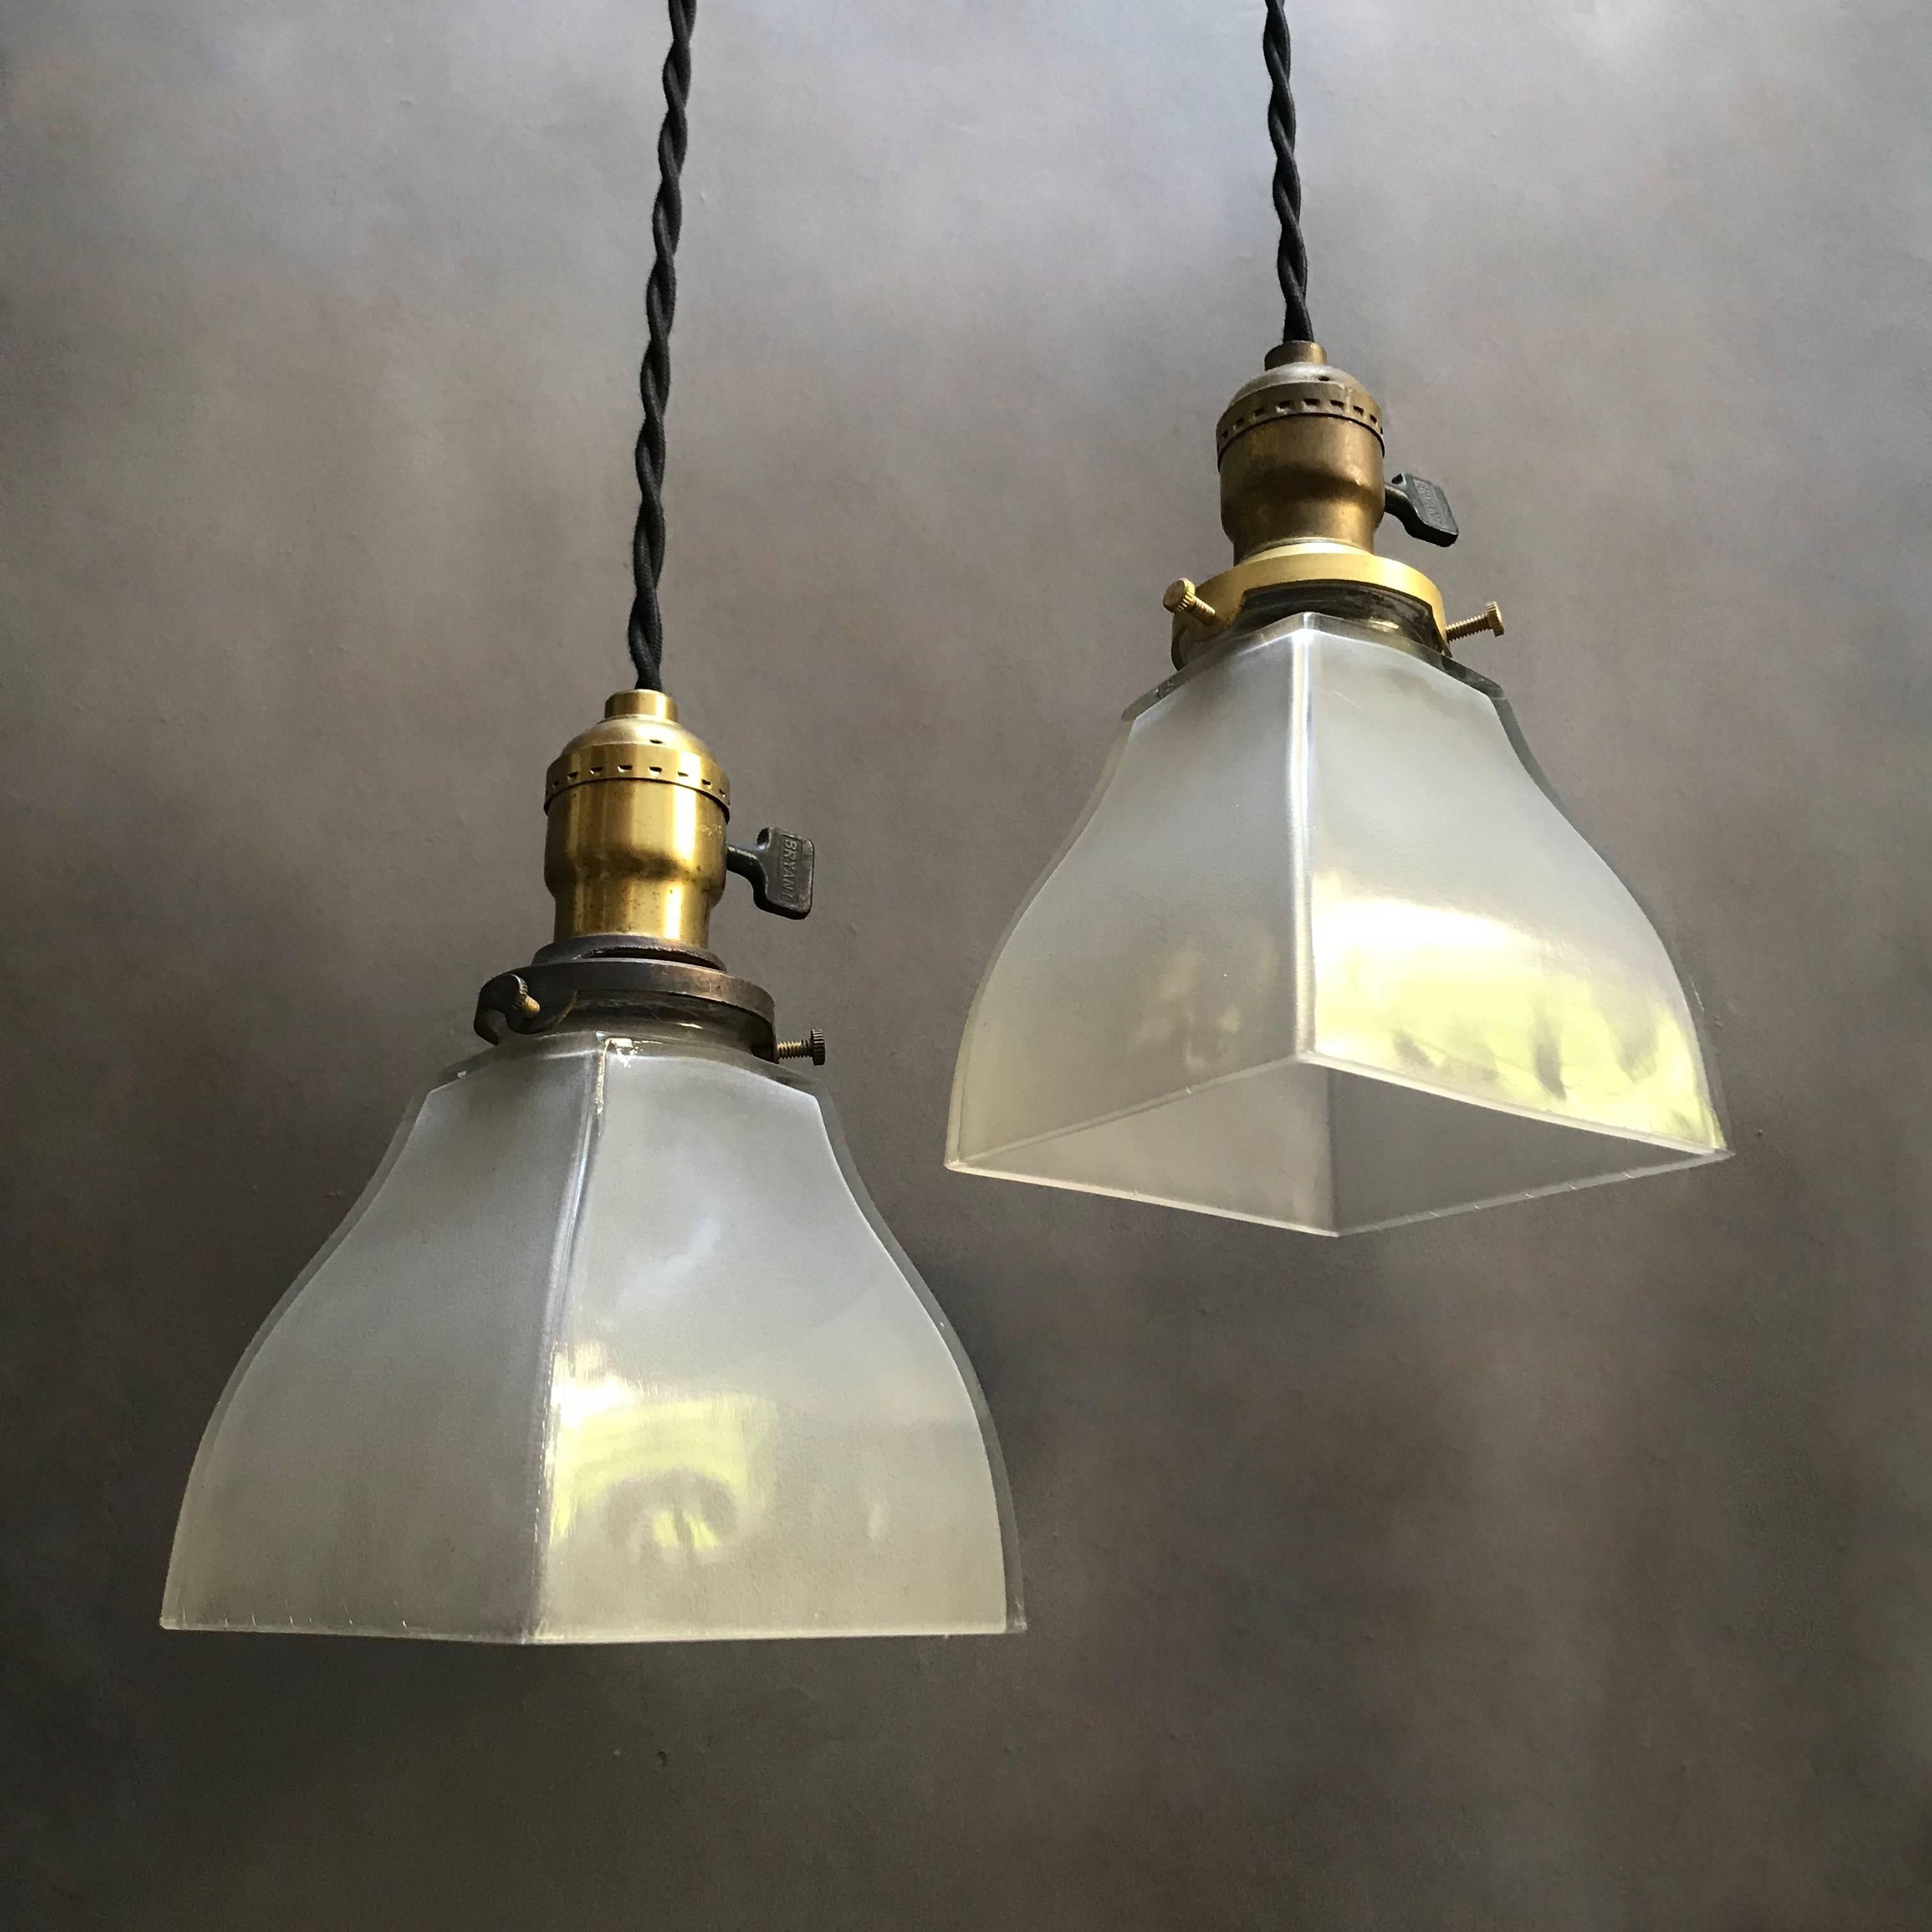 Pair of Industrial Frosted Glass and Brass Pendant Lights In Excellent Condition For Sale In Brooklyn, NY